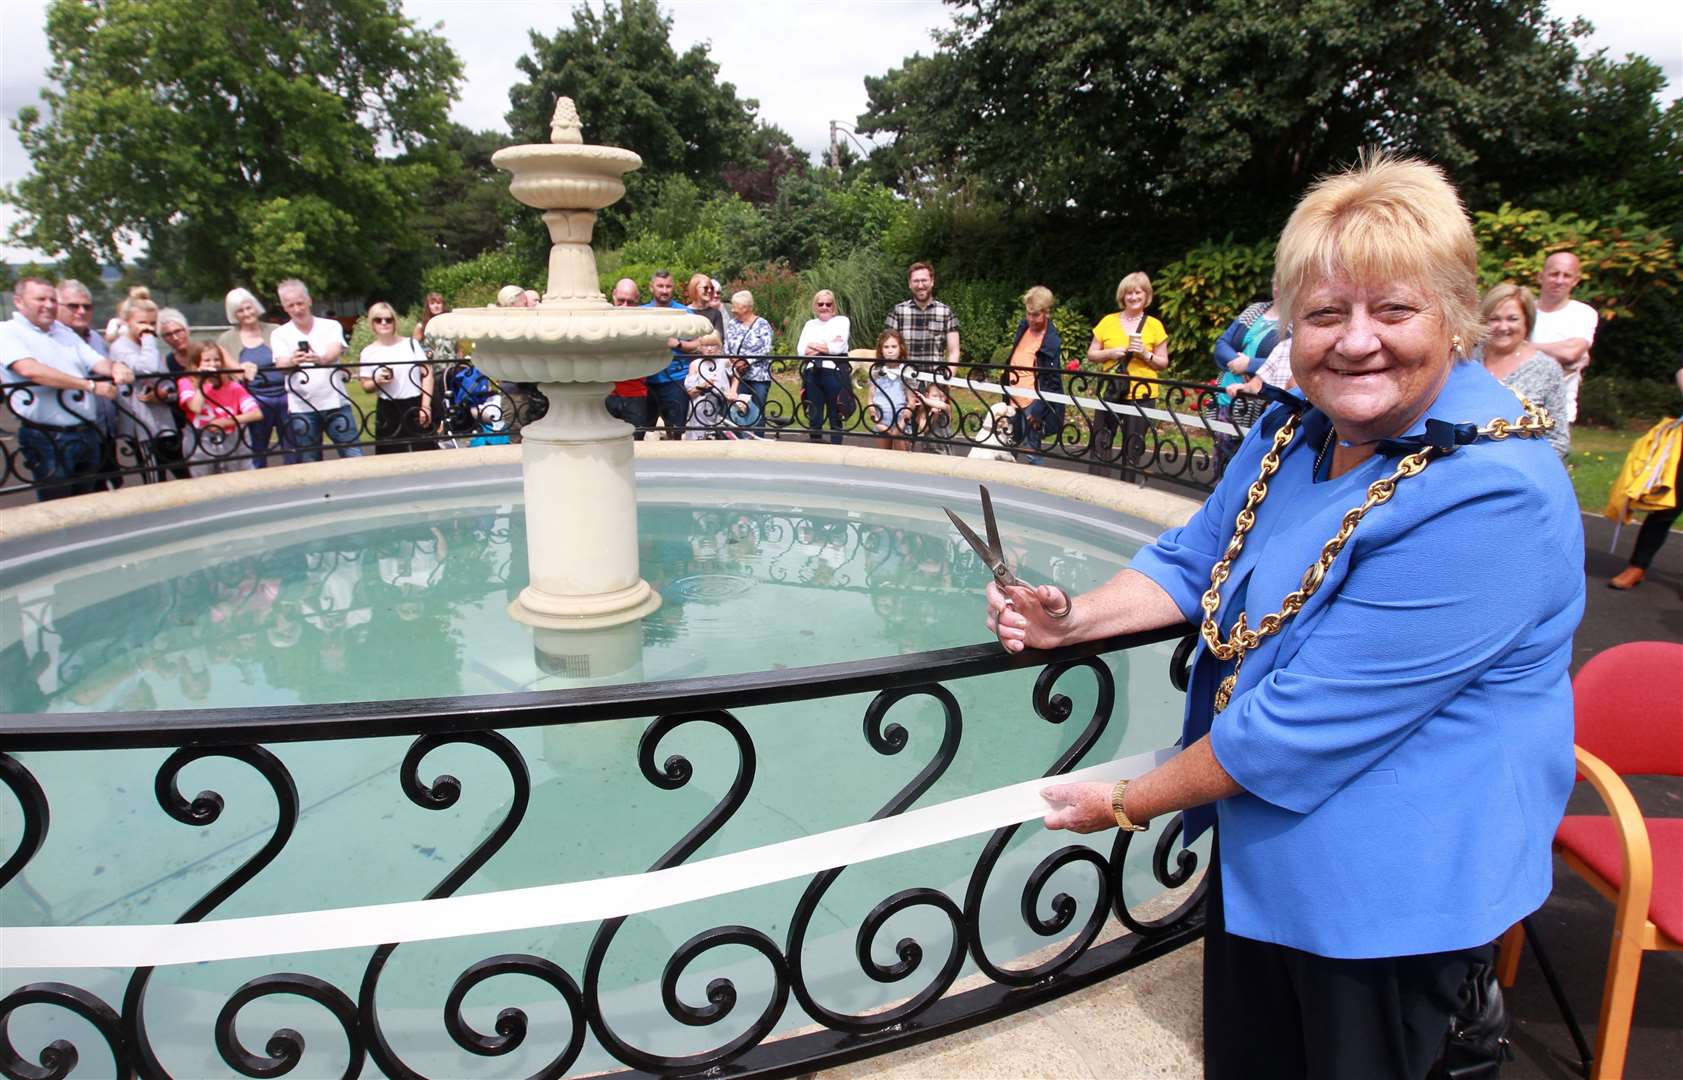 Marion Ring, as Mayor, officially "opening" the rejuvenated fountain in South Park in 2019 after it had been out of action for 15 years